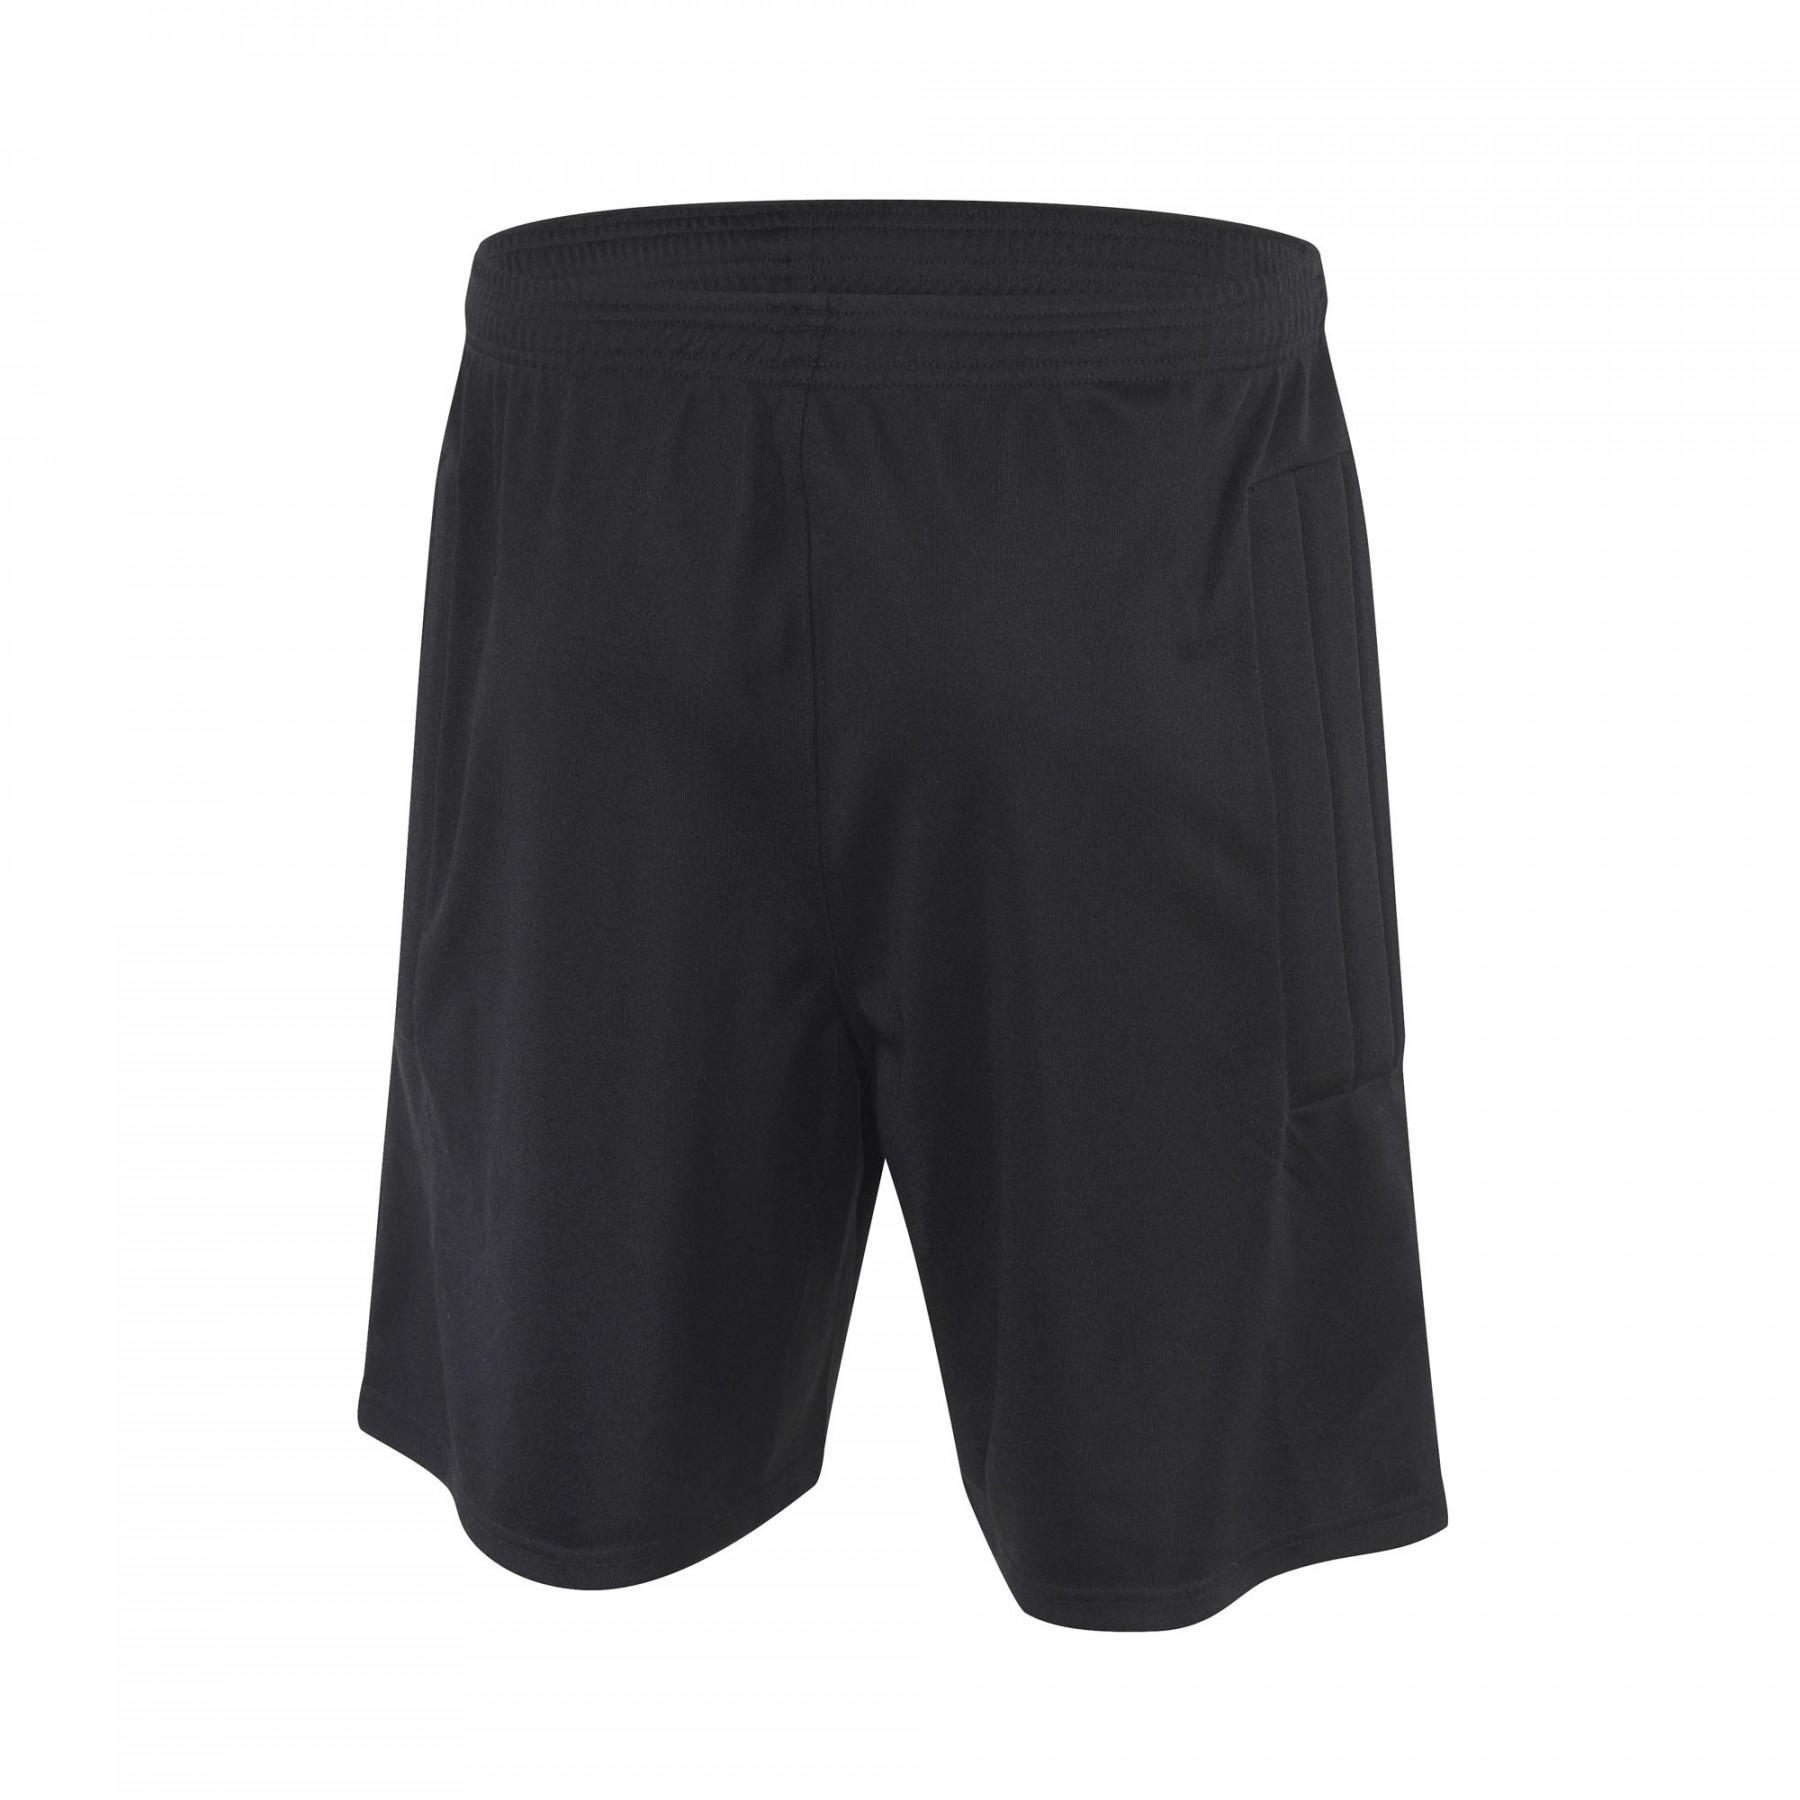 Keepersshort Macron cassiopea